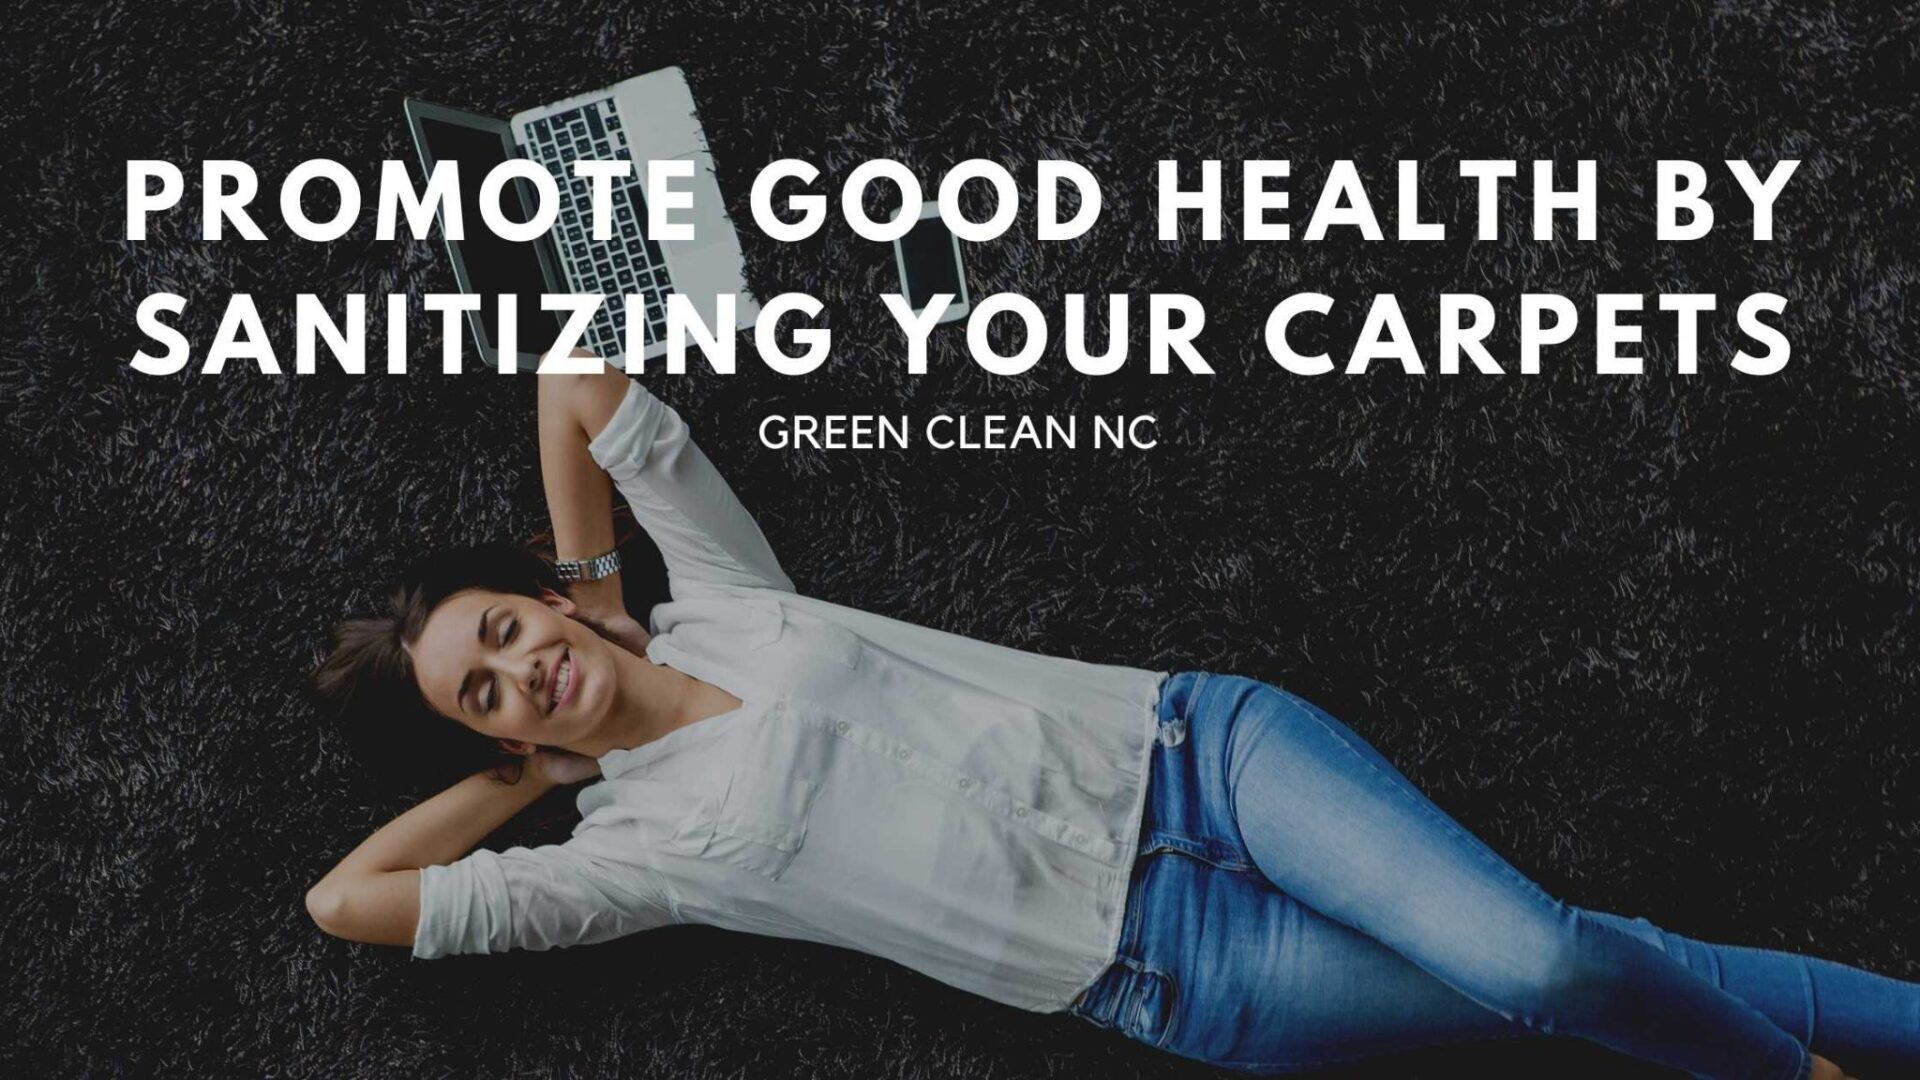 Promote Good Health by Sanitizing Your Carpets